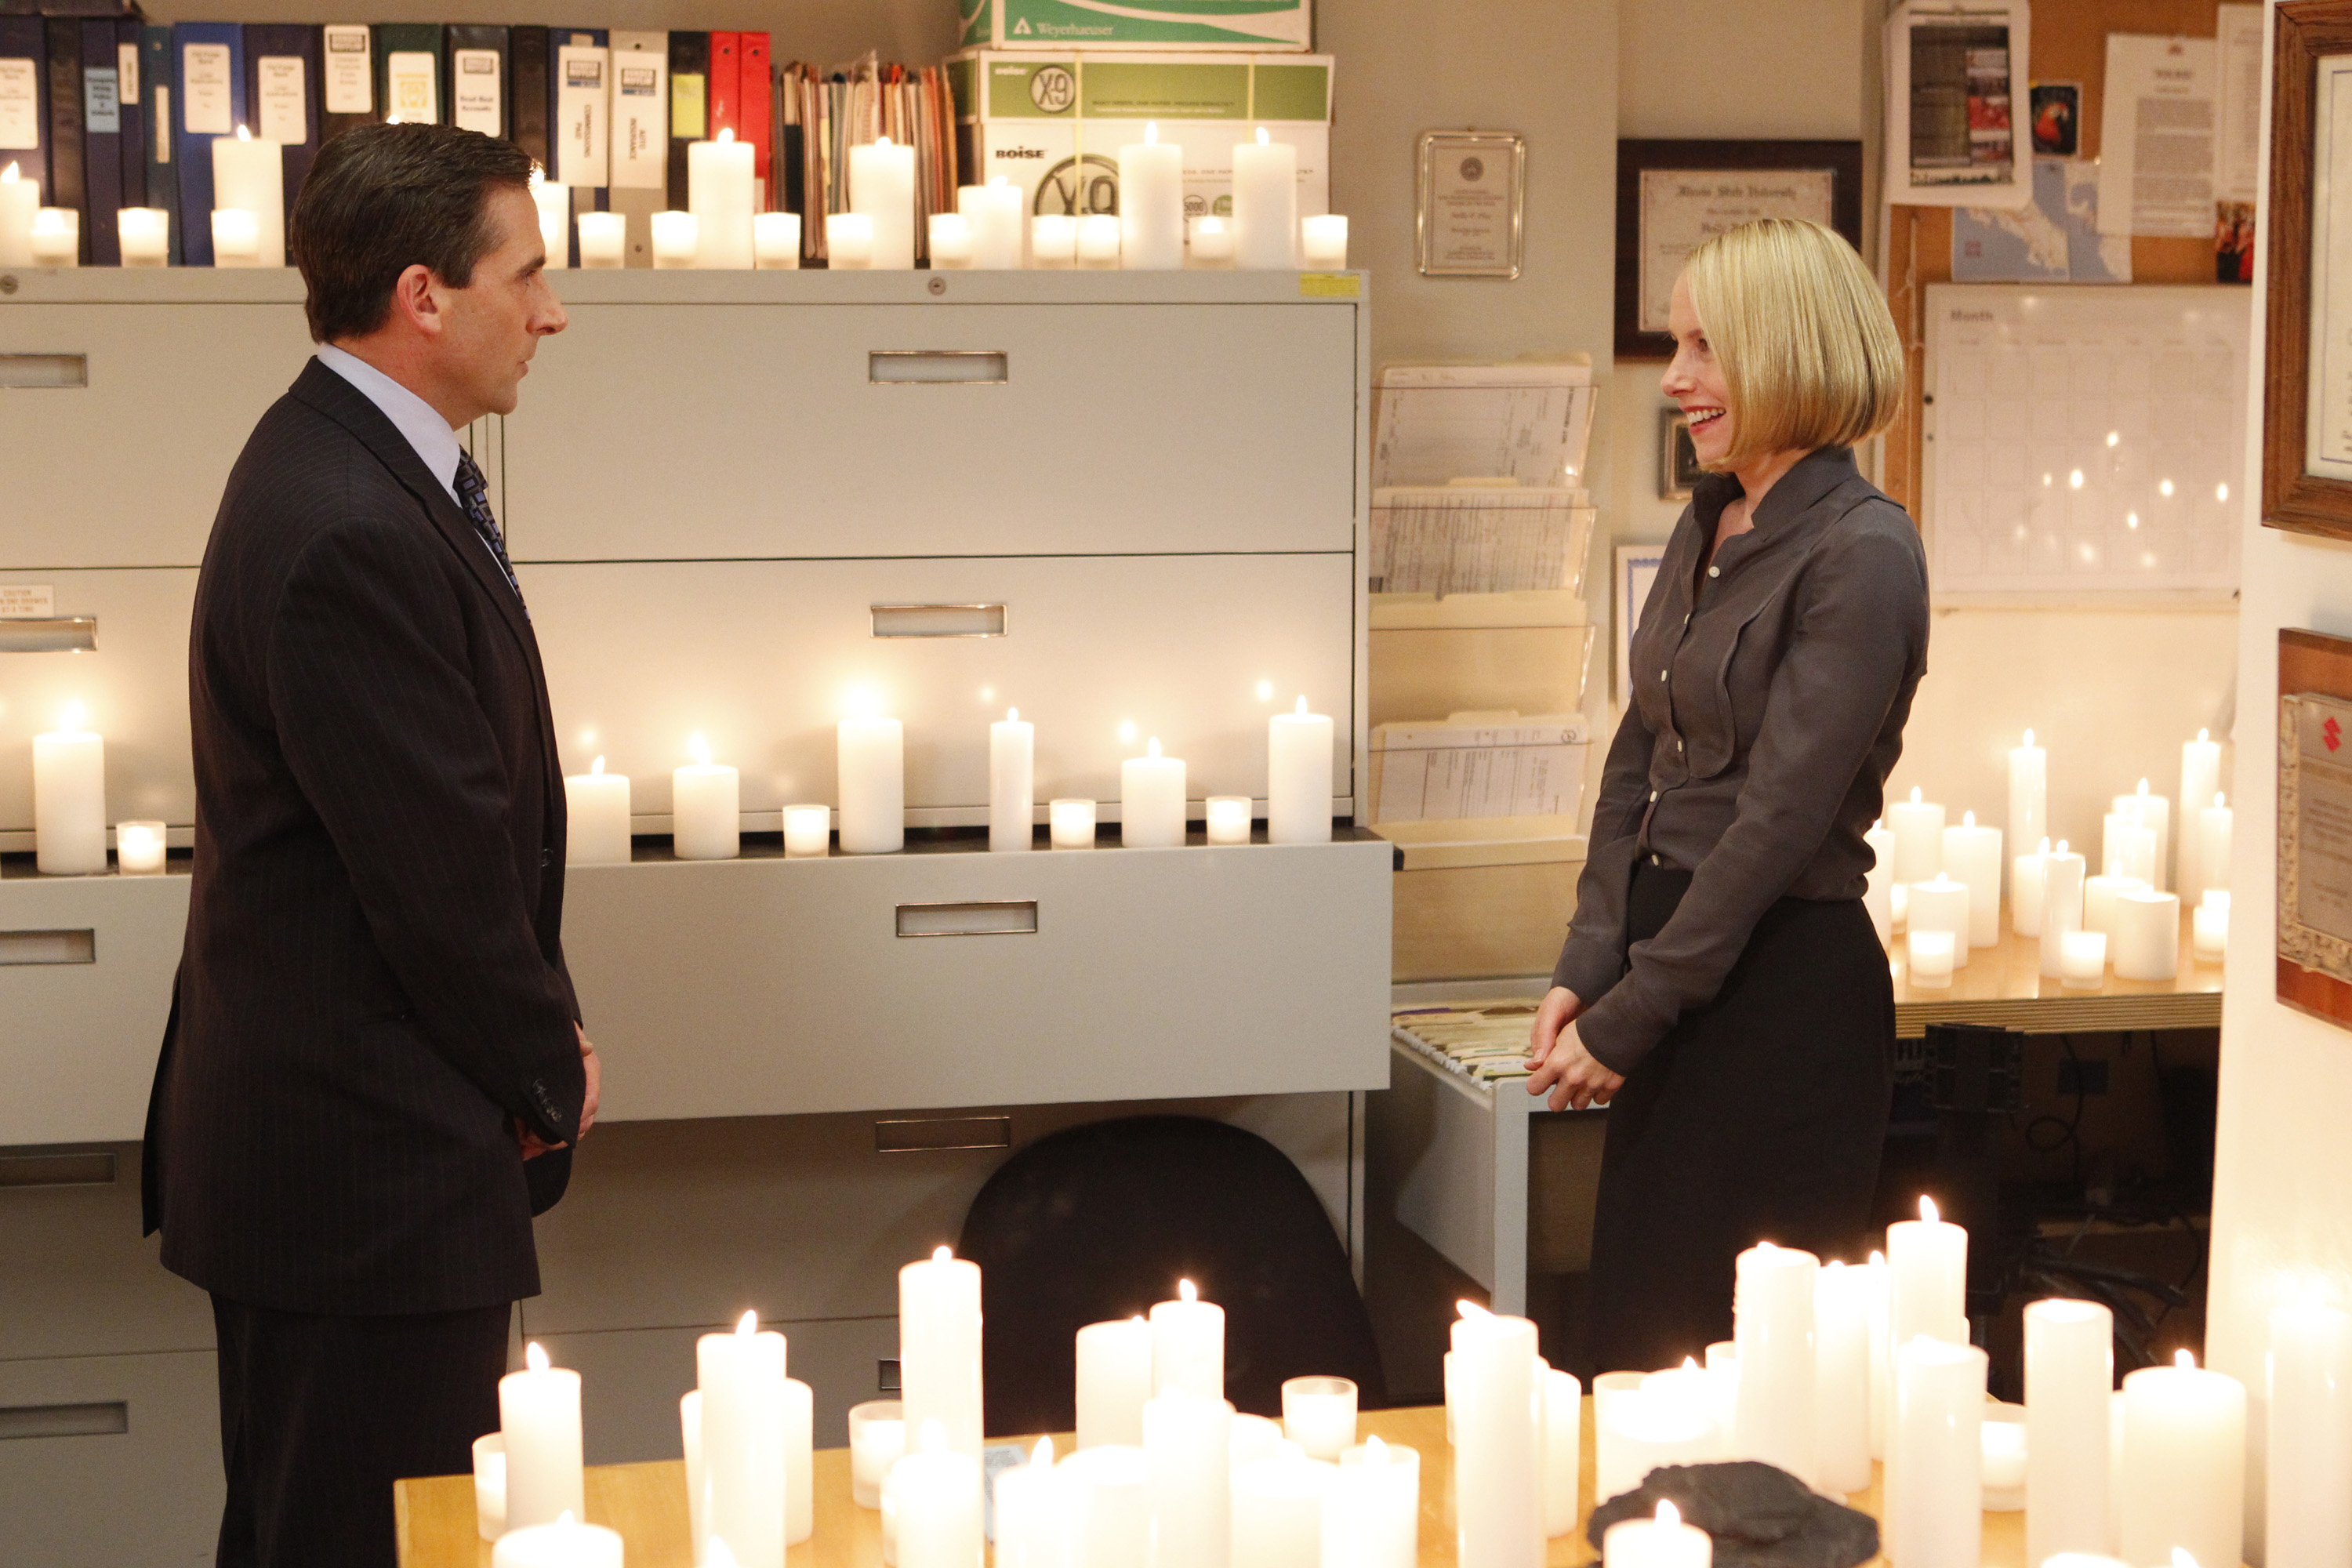 Steve Carell as Michael Scott and Amy Ryan as Holly Flax